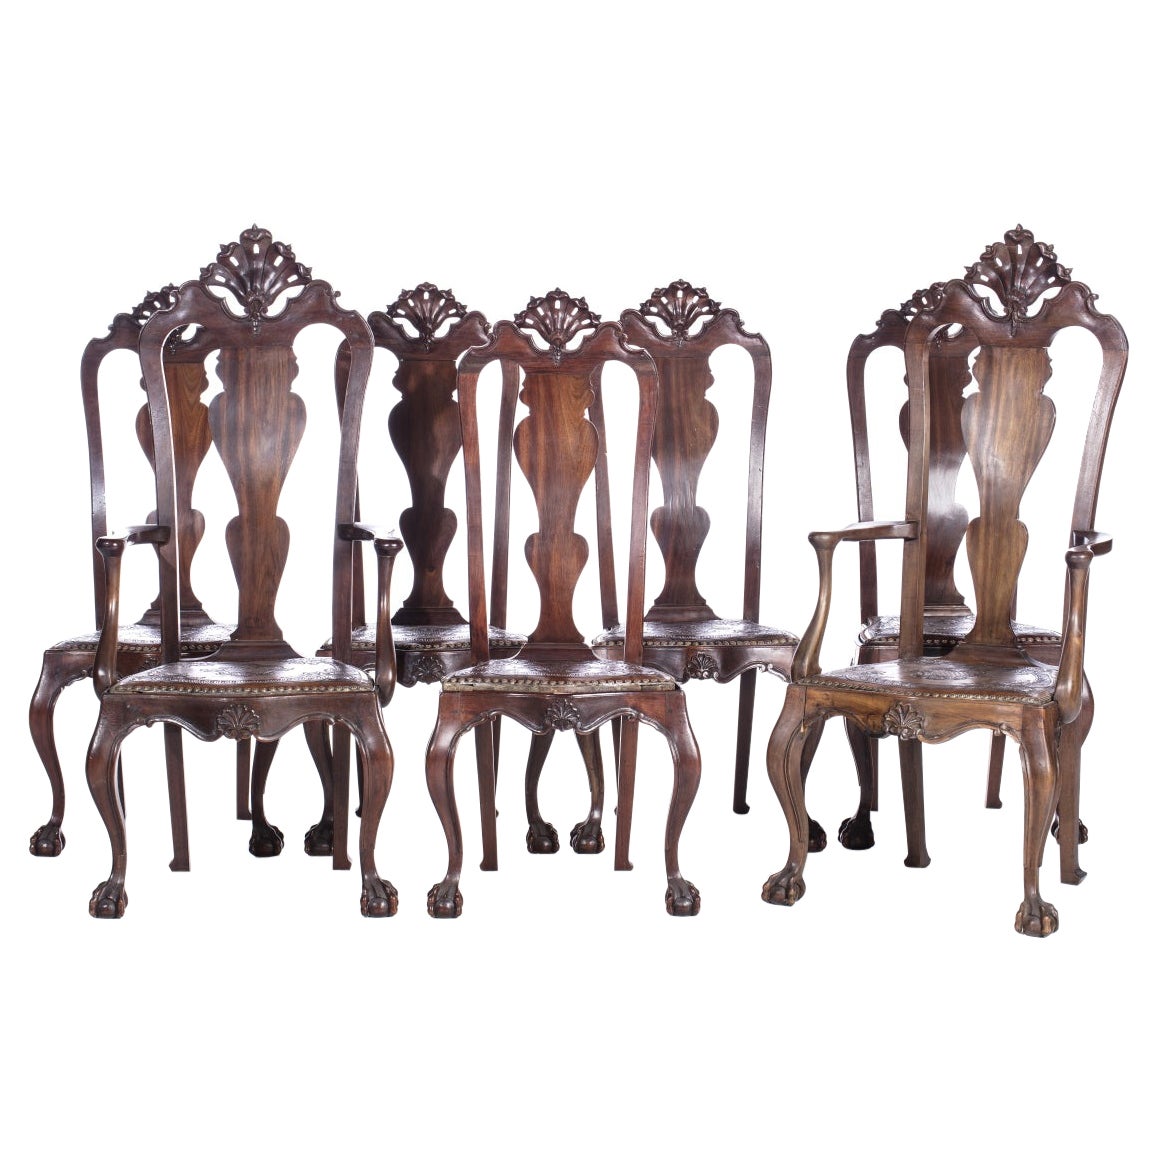 Five Chairs and Two Armchairs Portuguese of the 18th Century